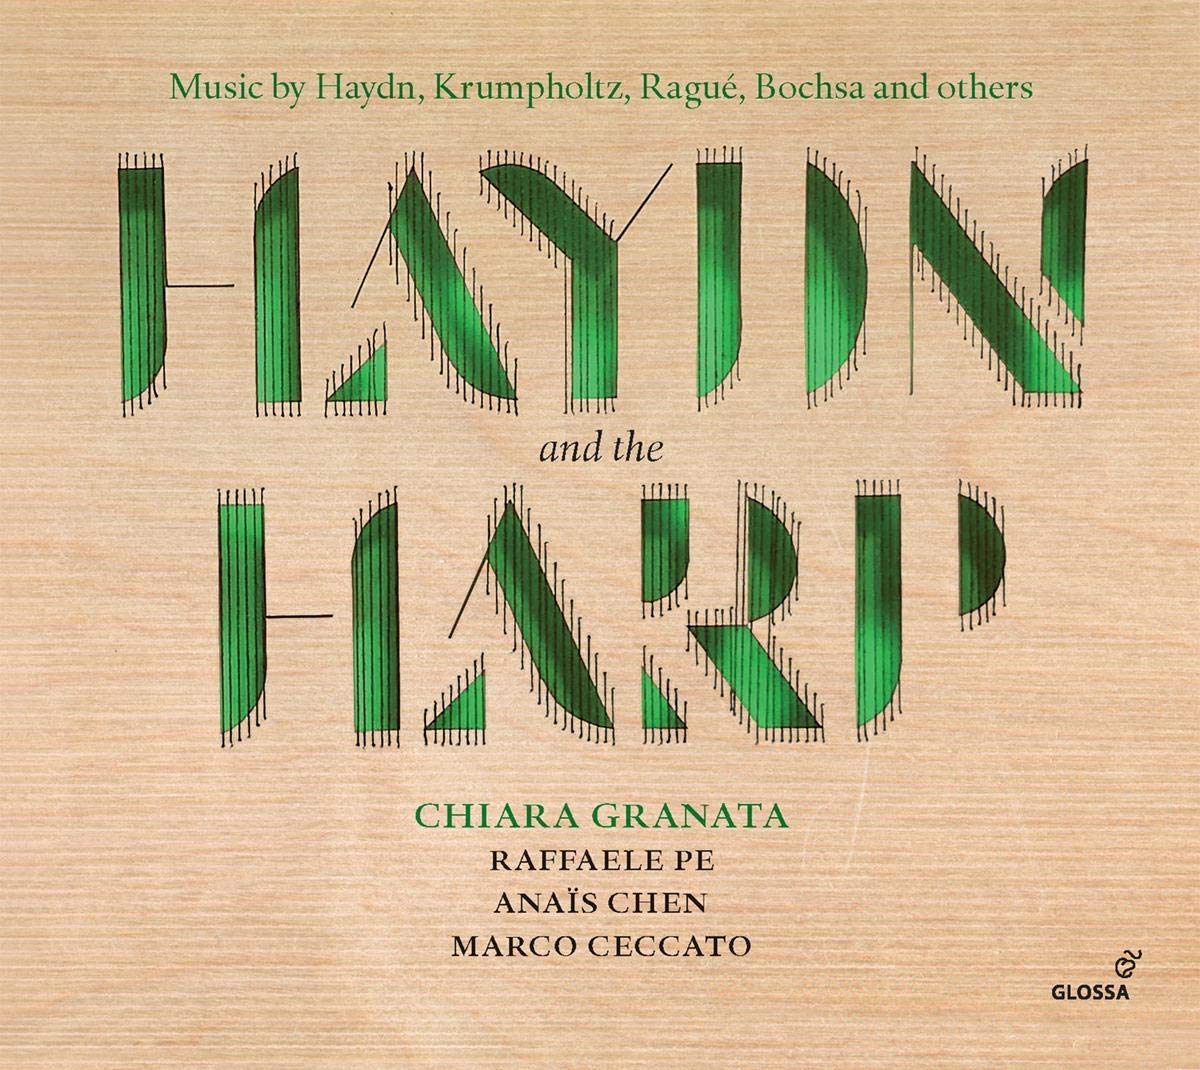 CD cover of recording of music by Haydn with harp